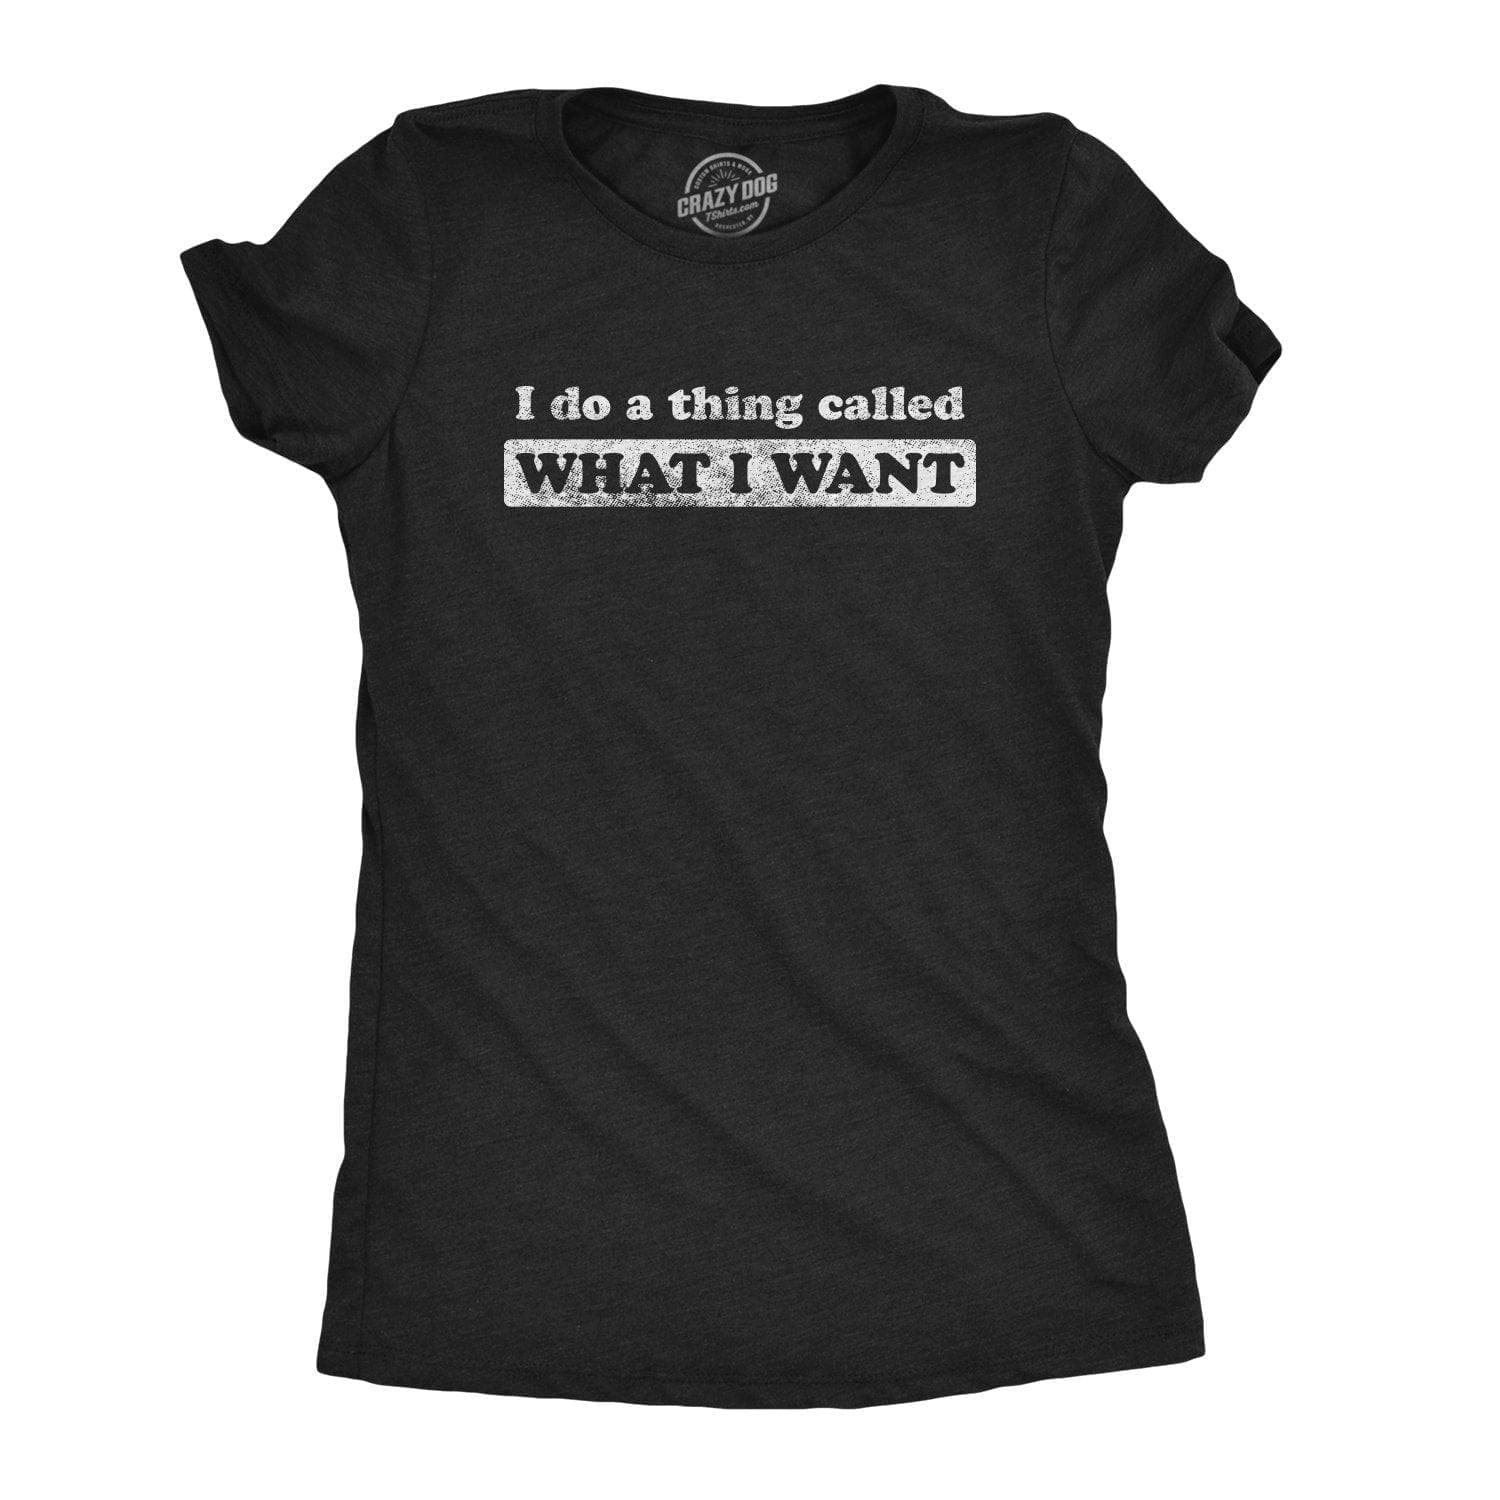 I Do A Thing Called What I Want Women's Tshirt - Crazy Dog T-Shirts